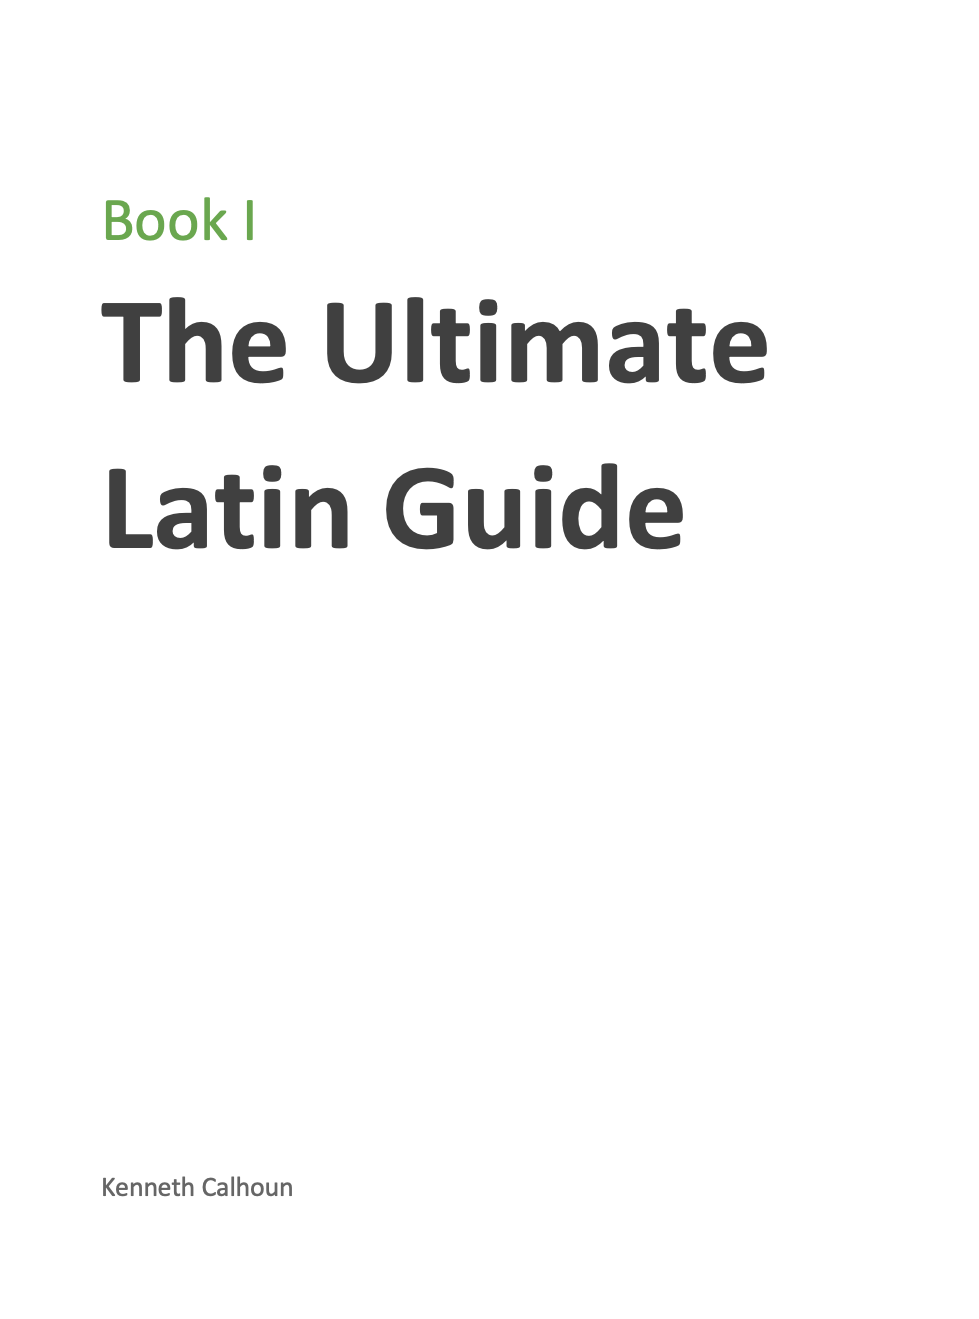 The Ultimate Latin Guide - Book 1 Thumbnail.